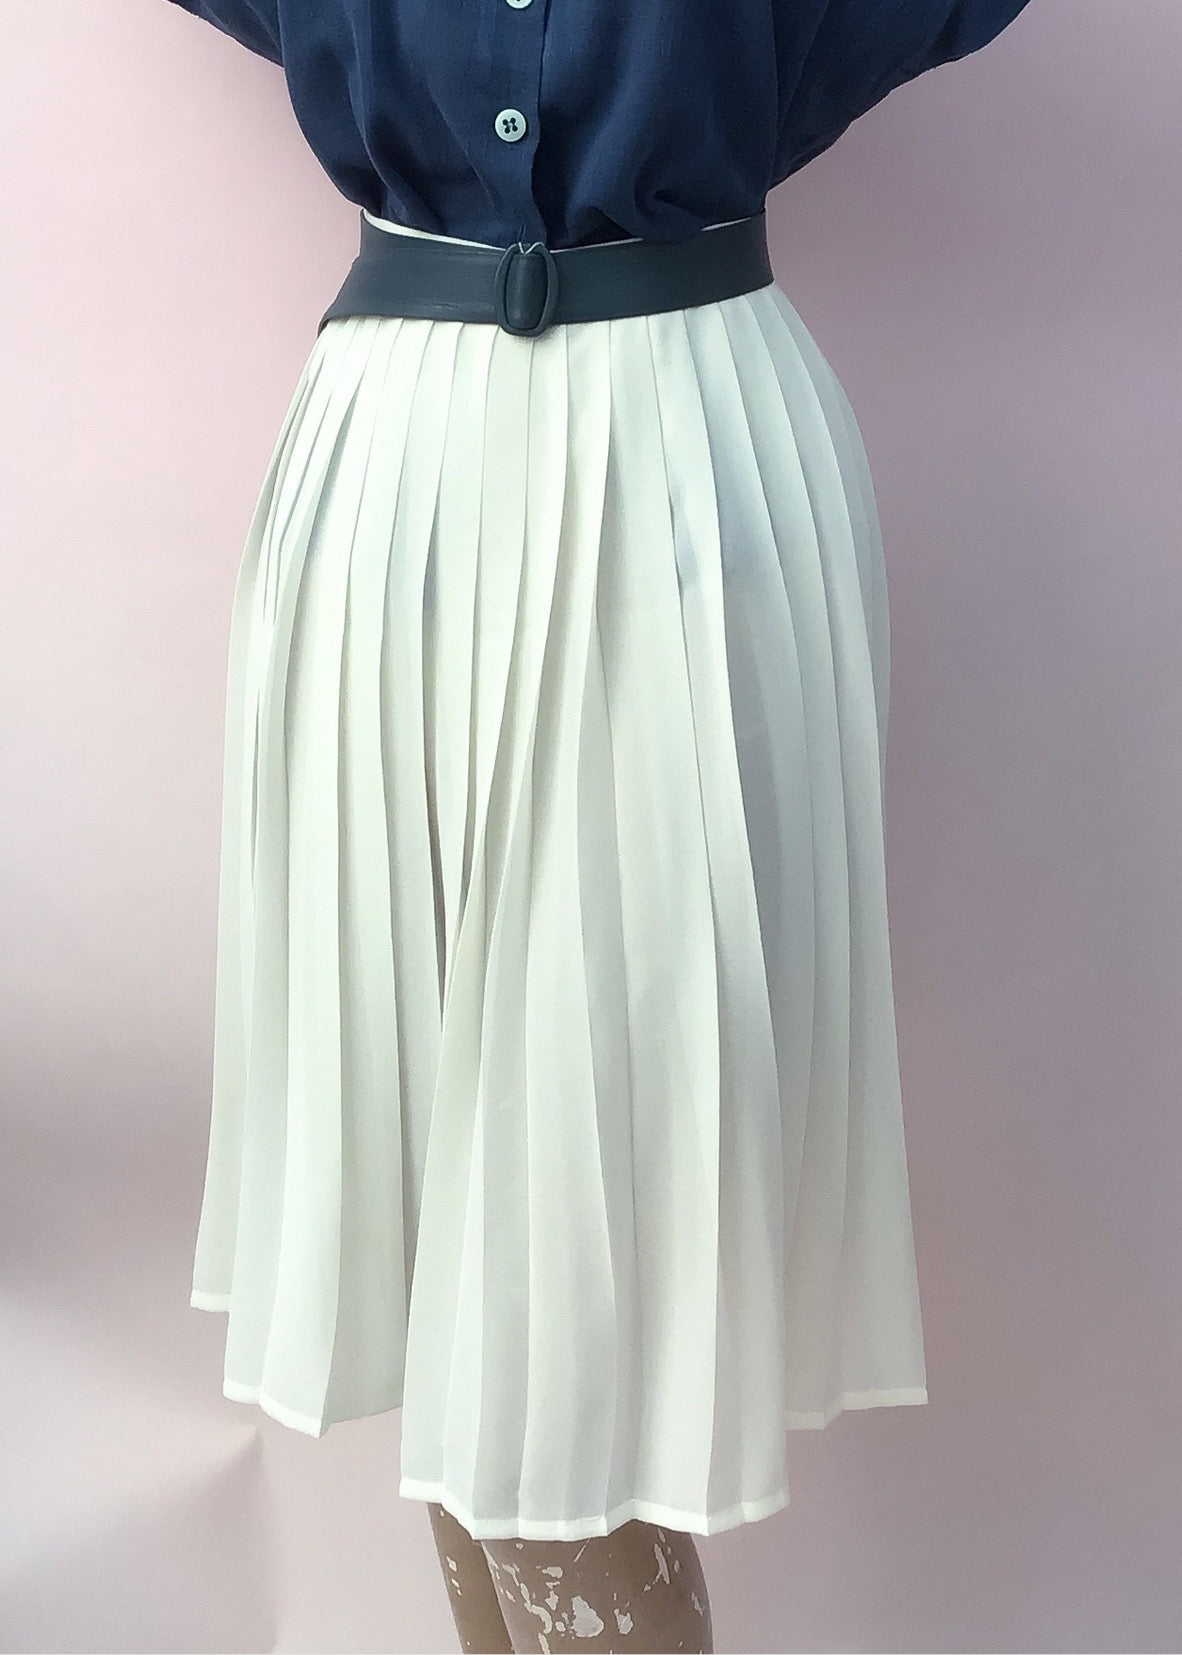 1970s Vintage Sheer Cream Pleated Sunray Skirt by M&S